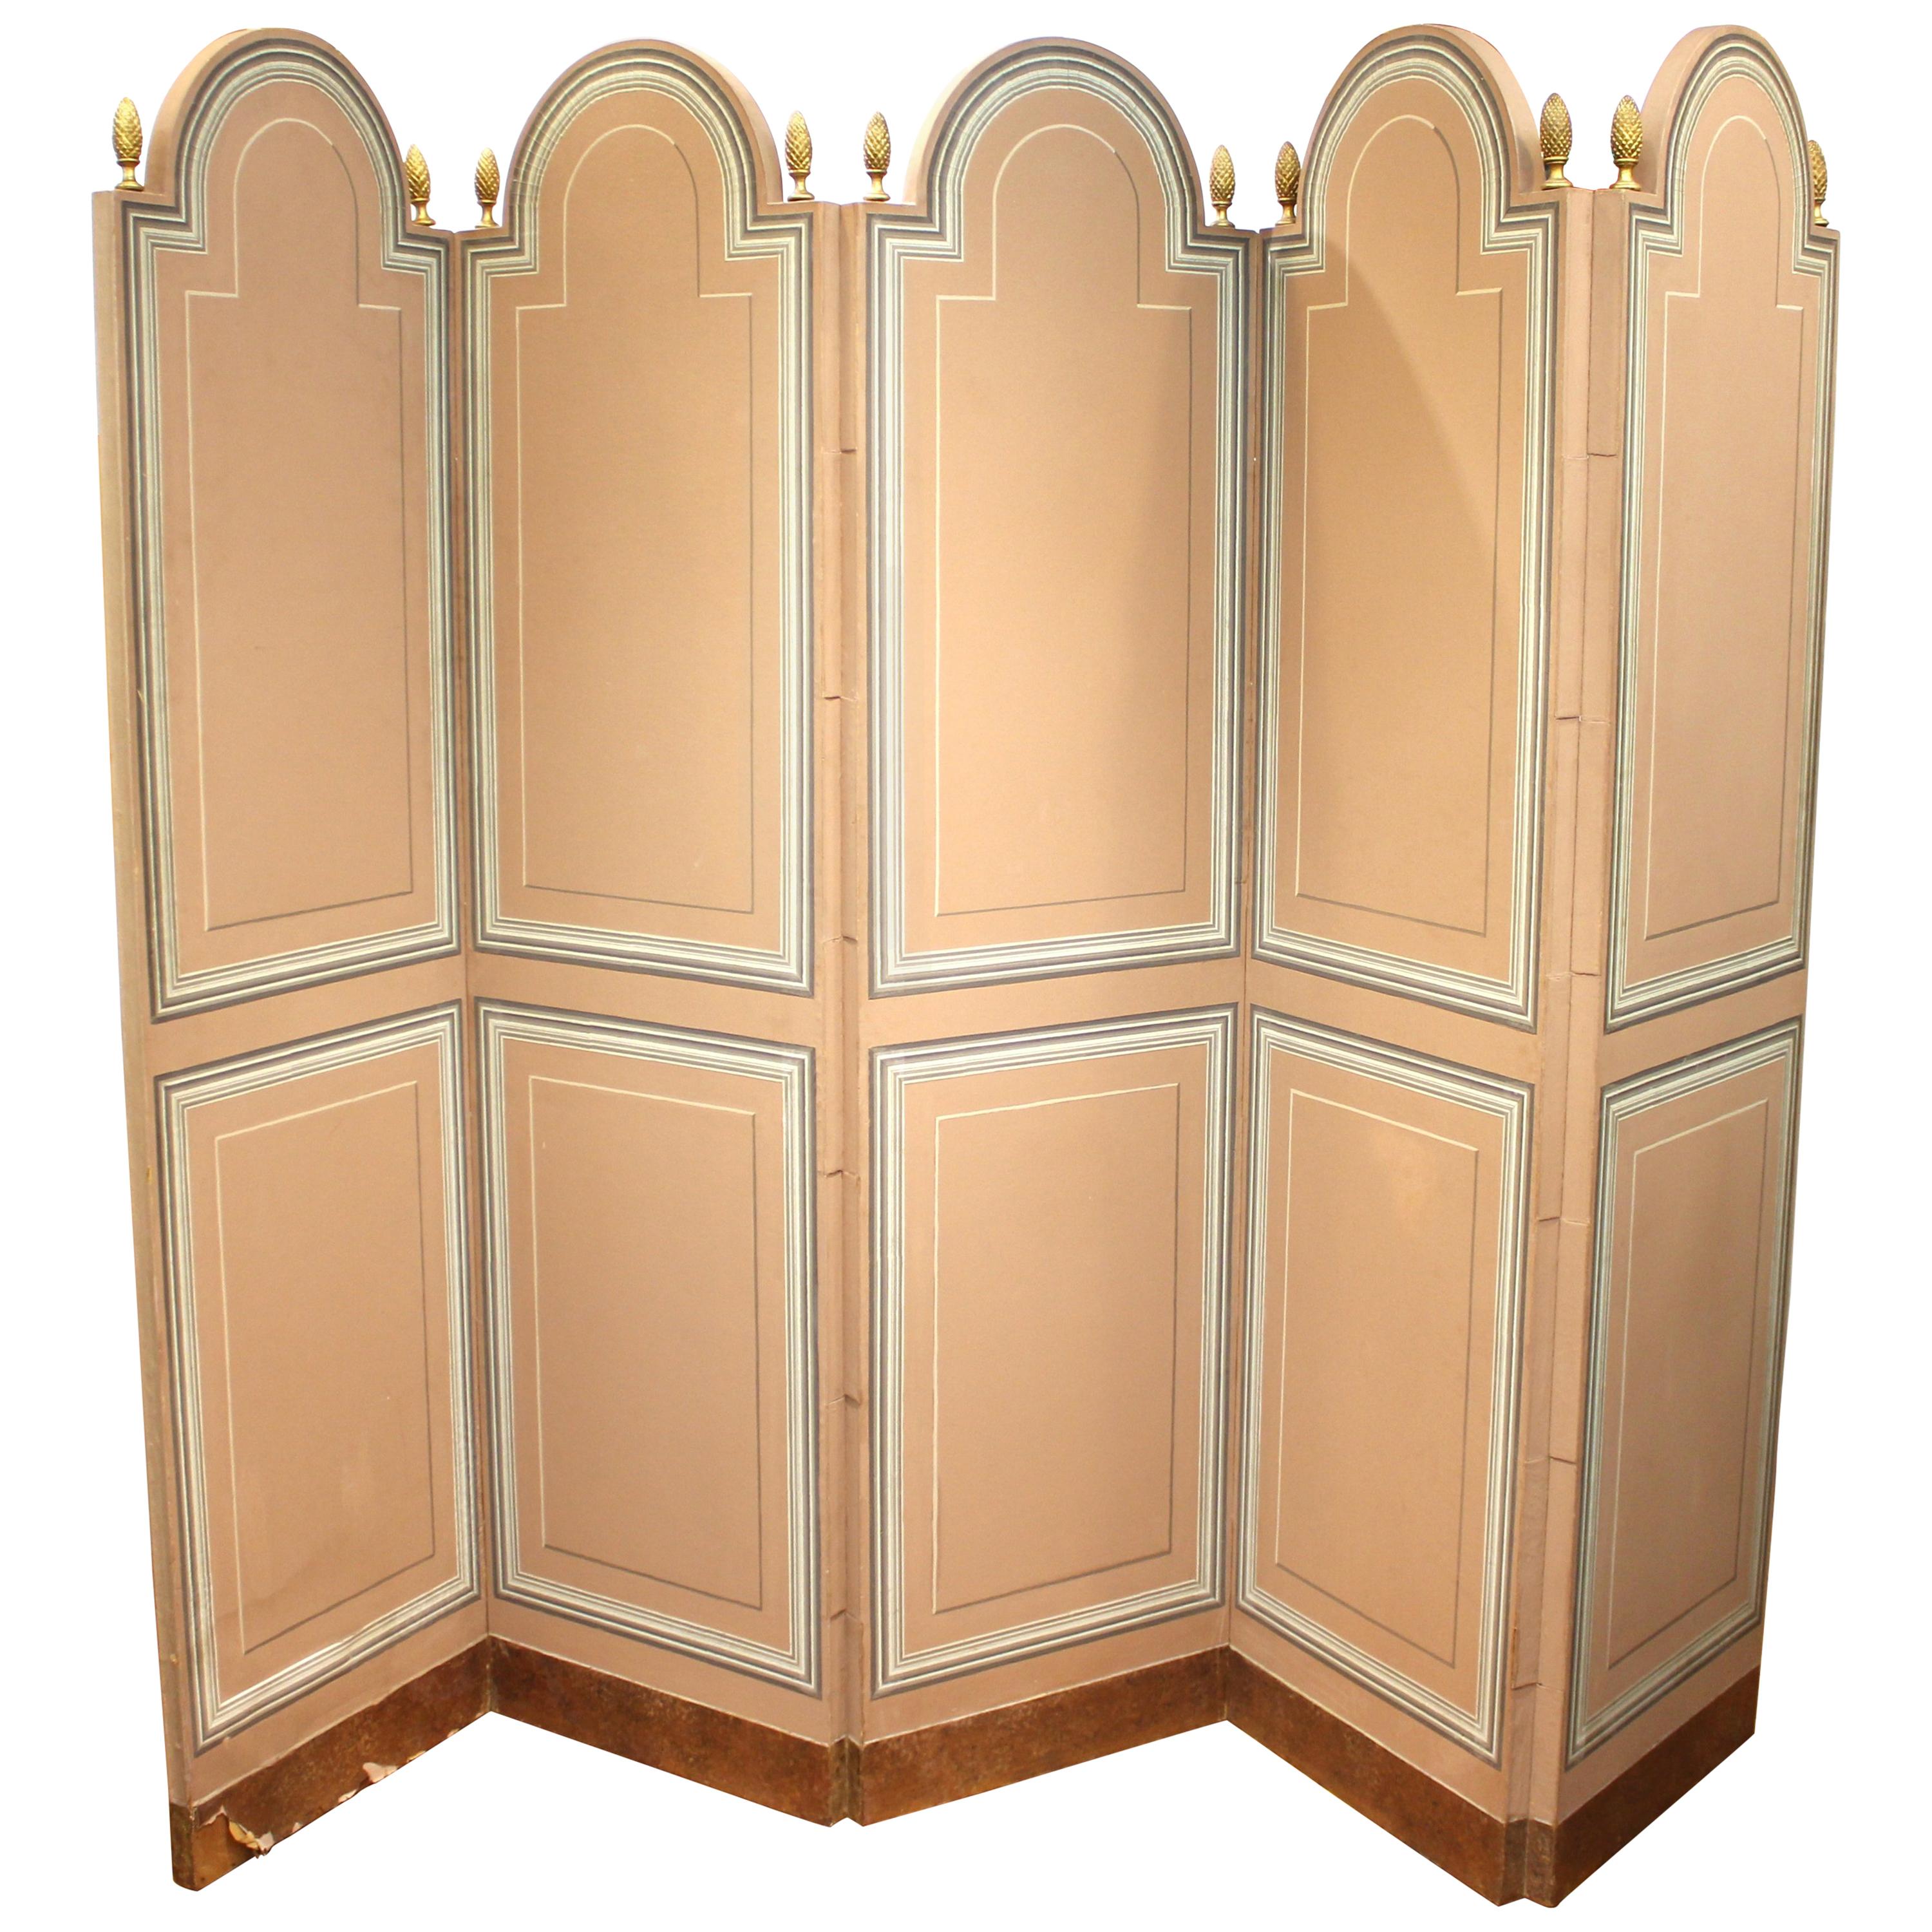 Maison Jansen Folding Screen in Pink with Pinecone Finials